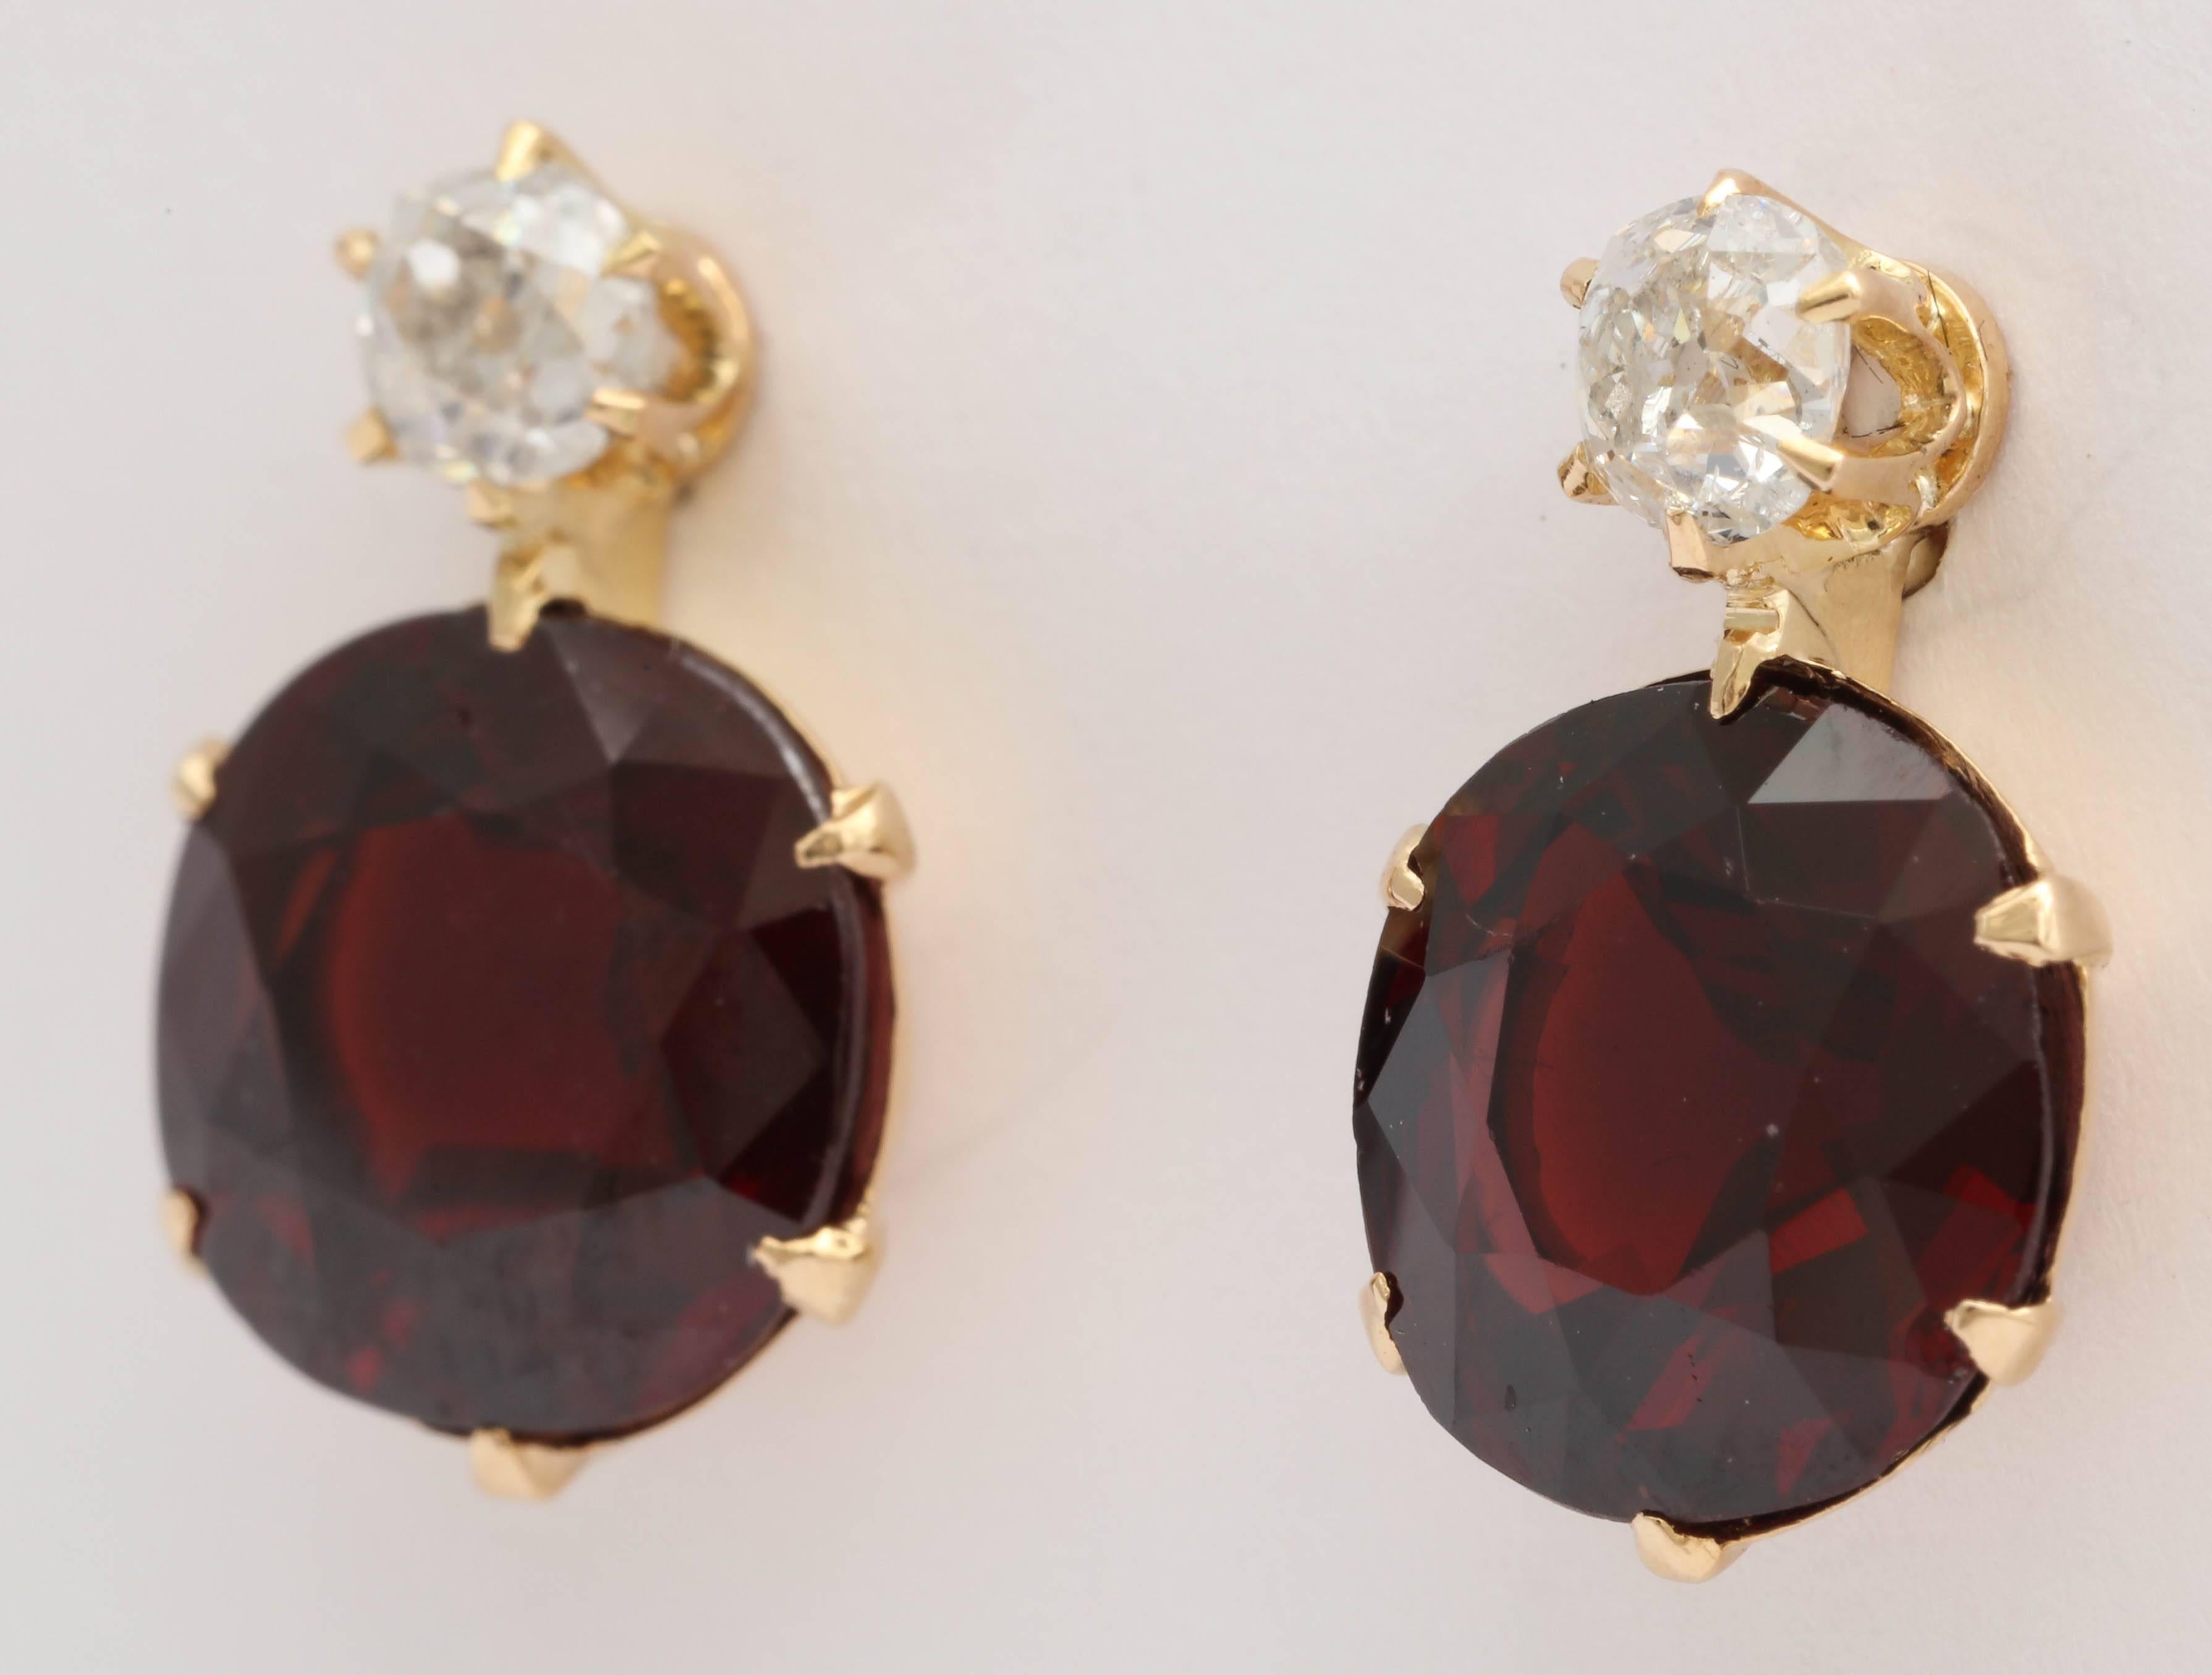 Faceted Garnet stones - Prong set in 18kt Yellow Gold & suspended from a single Prong set Old mine Diamond. Adapted to posts.